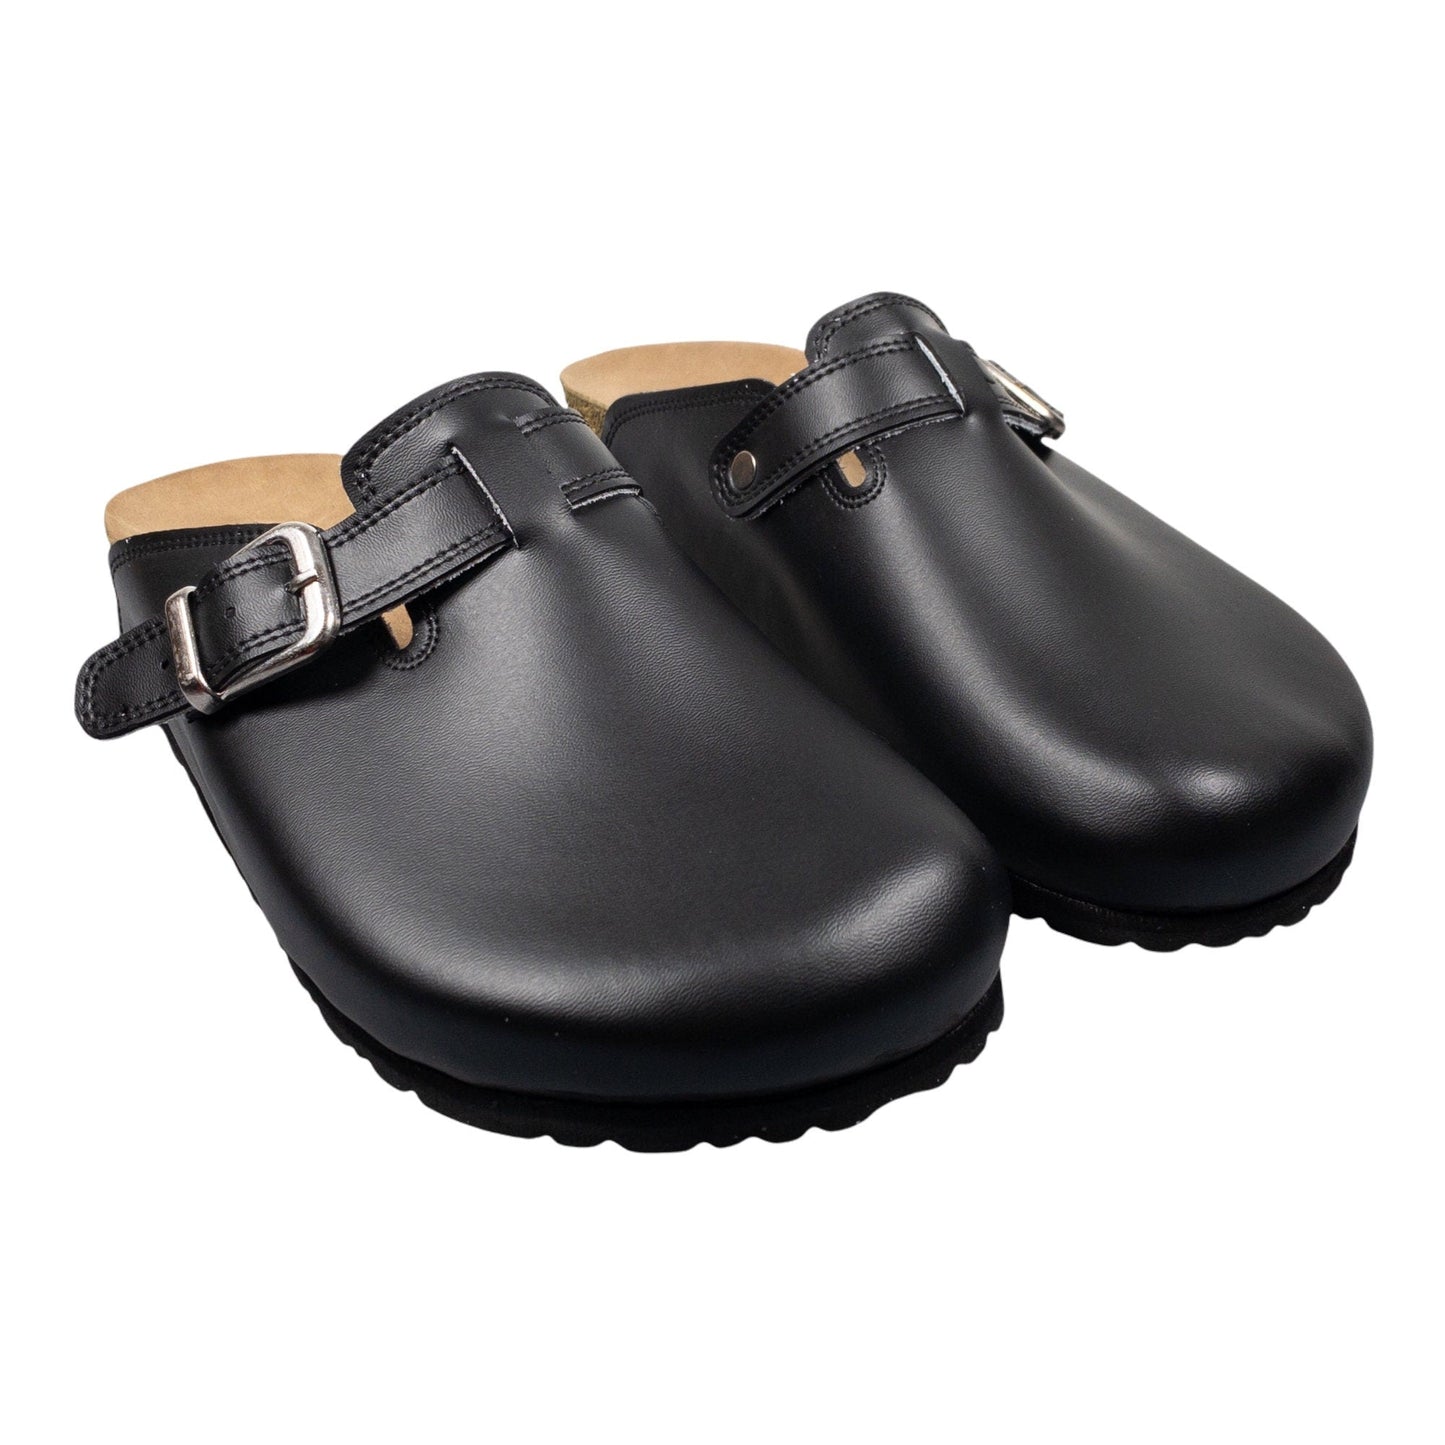 Black Boston Leather Clogs Slippers